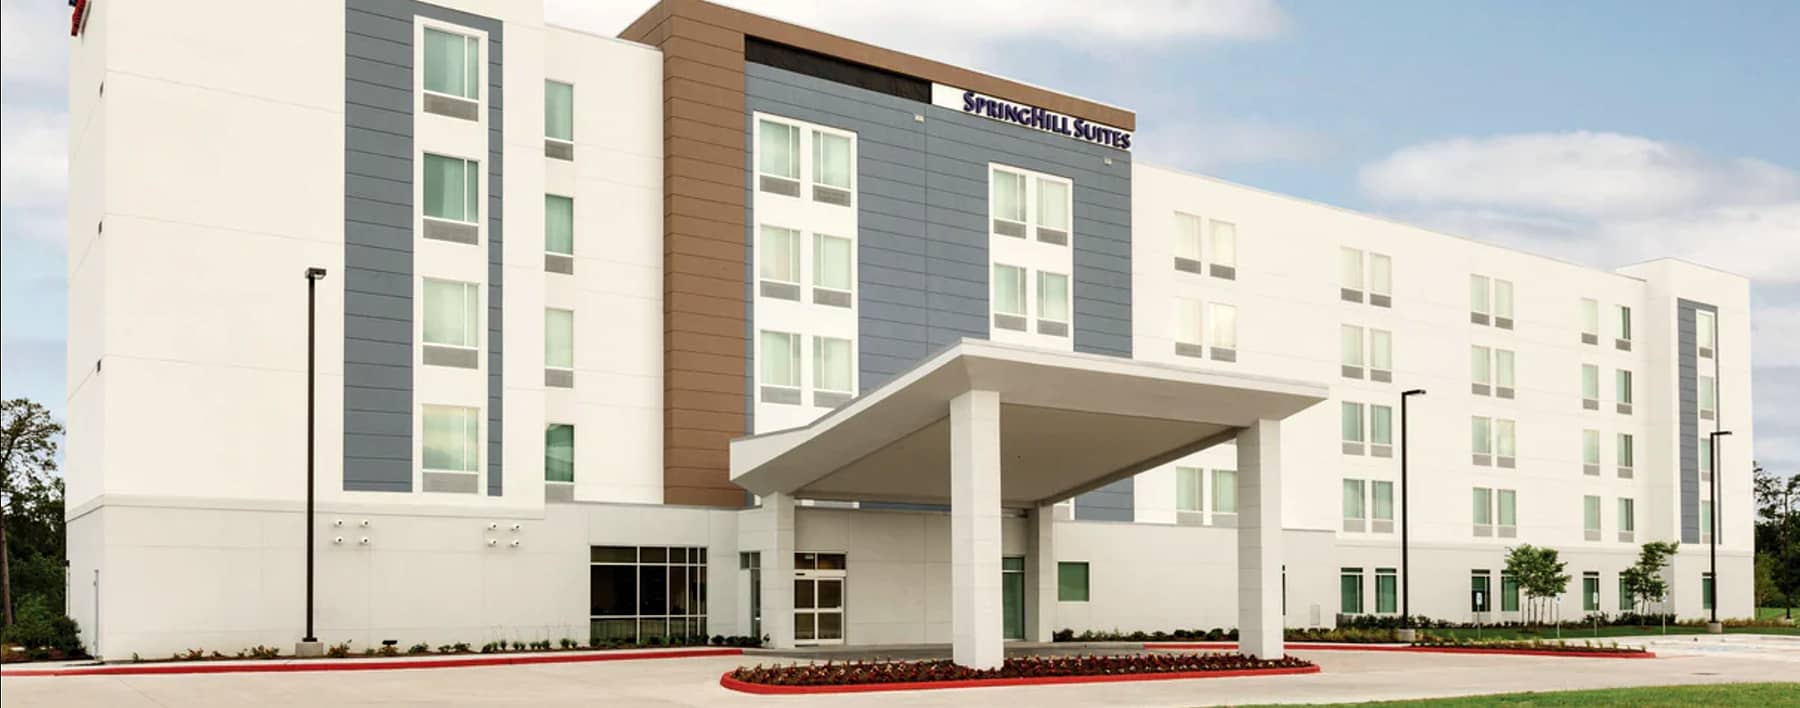 Water Damage Renovations at Springhill Suites in Houston, Texas | GLR, Inc.